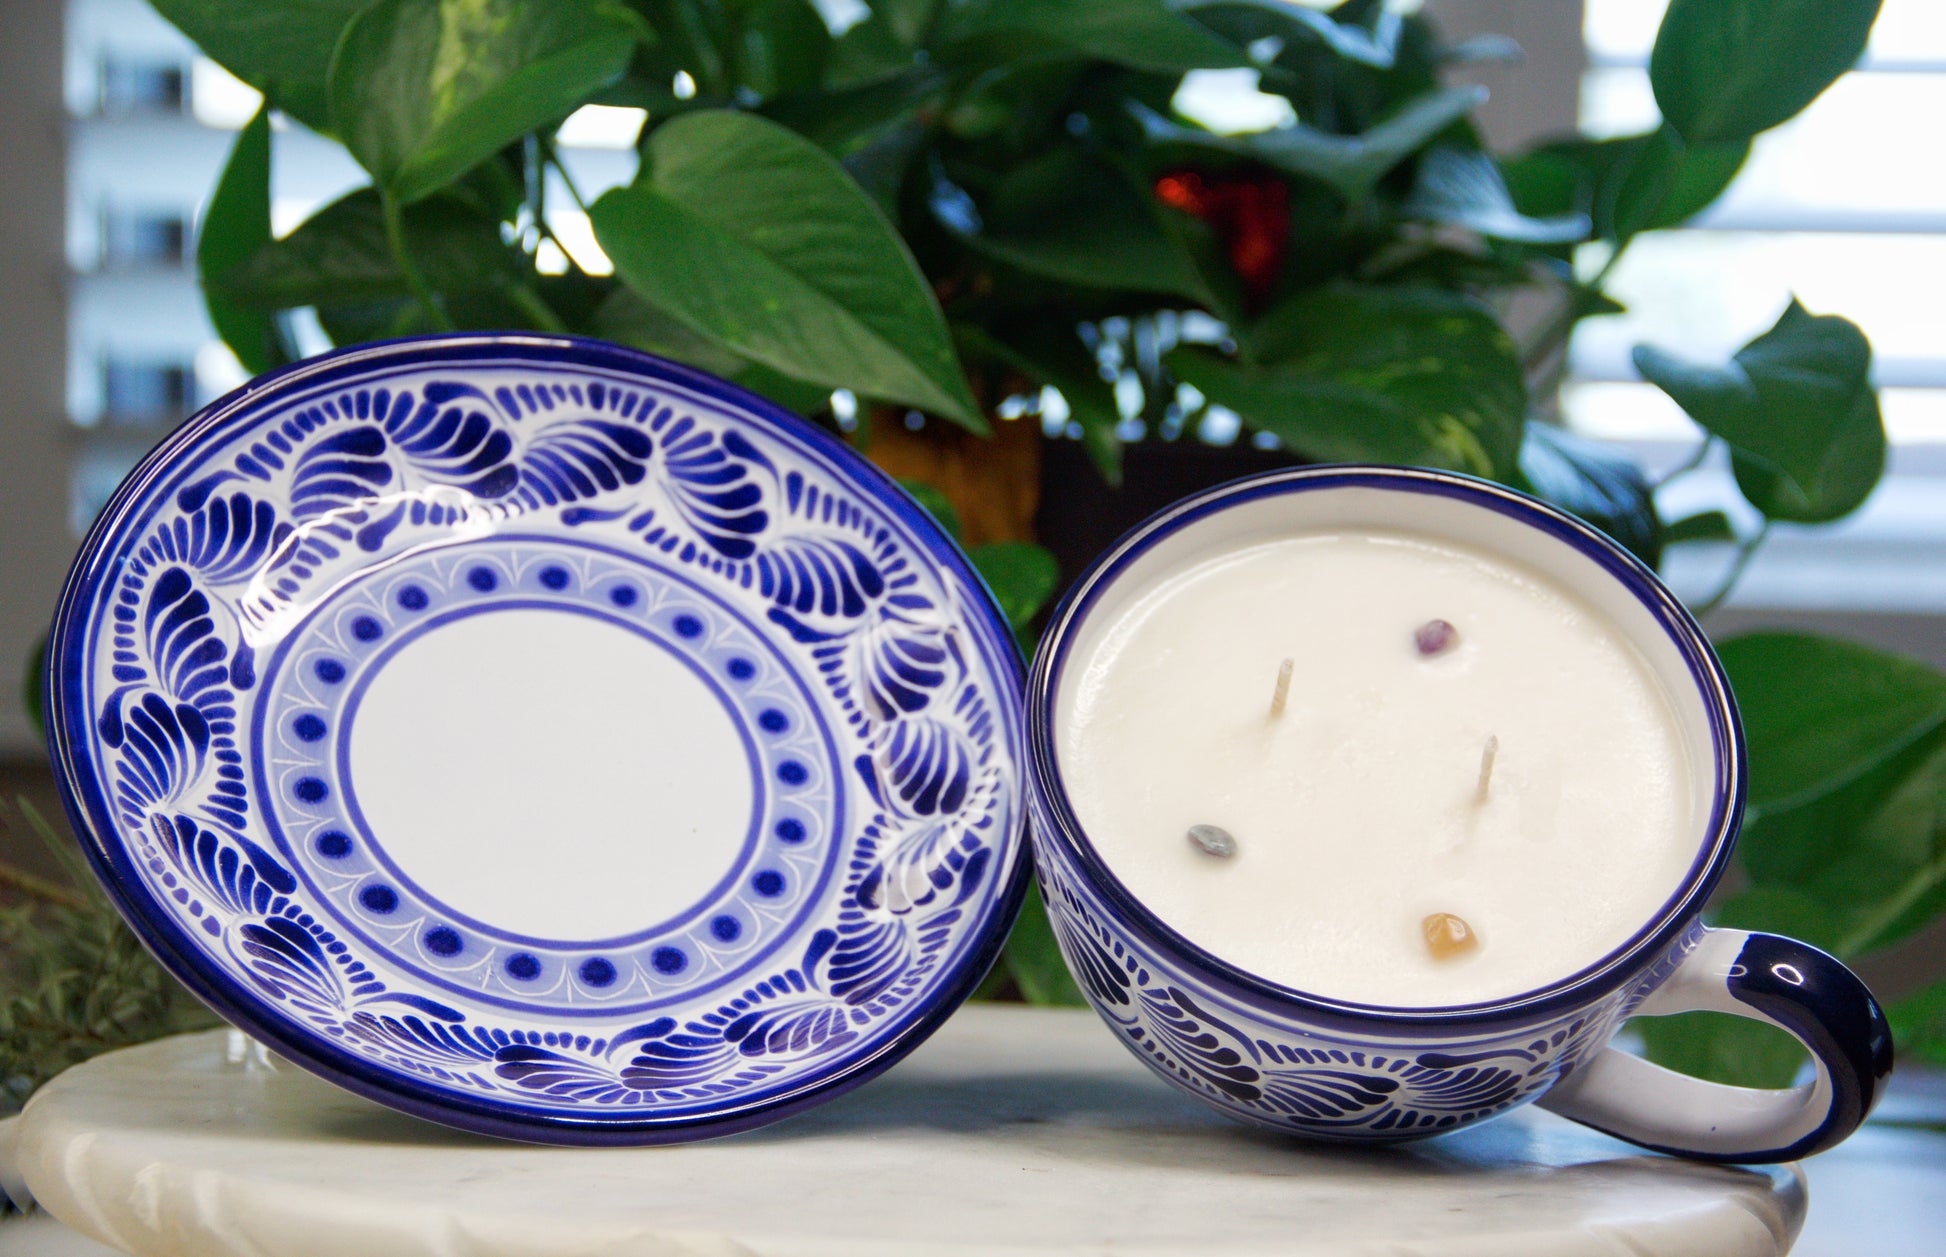 Artisanal soy candle in a beautiful blue and white hand designed talavera cup and plate. Handcrafted by Artisan in Puebla, Mexico. 100% All Natural Soy Candle. Reuse the talavera as home decor or storage.